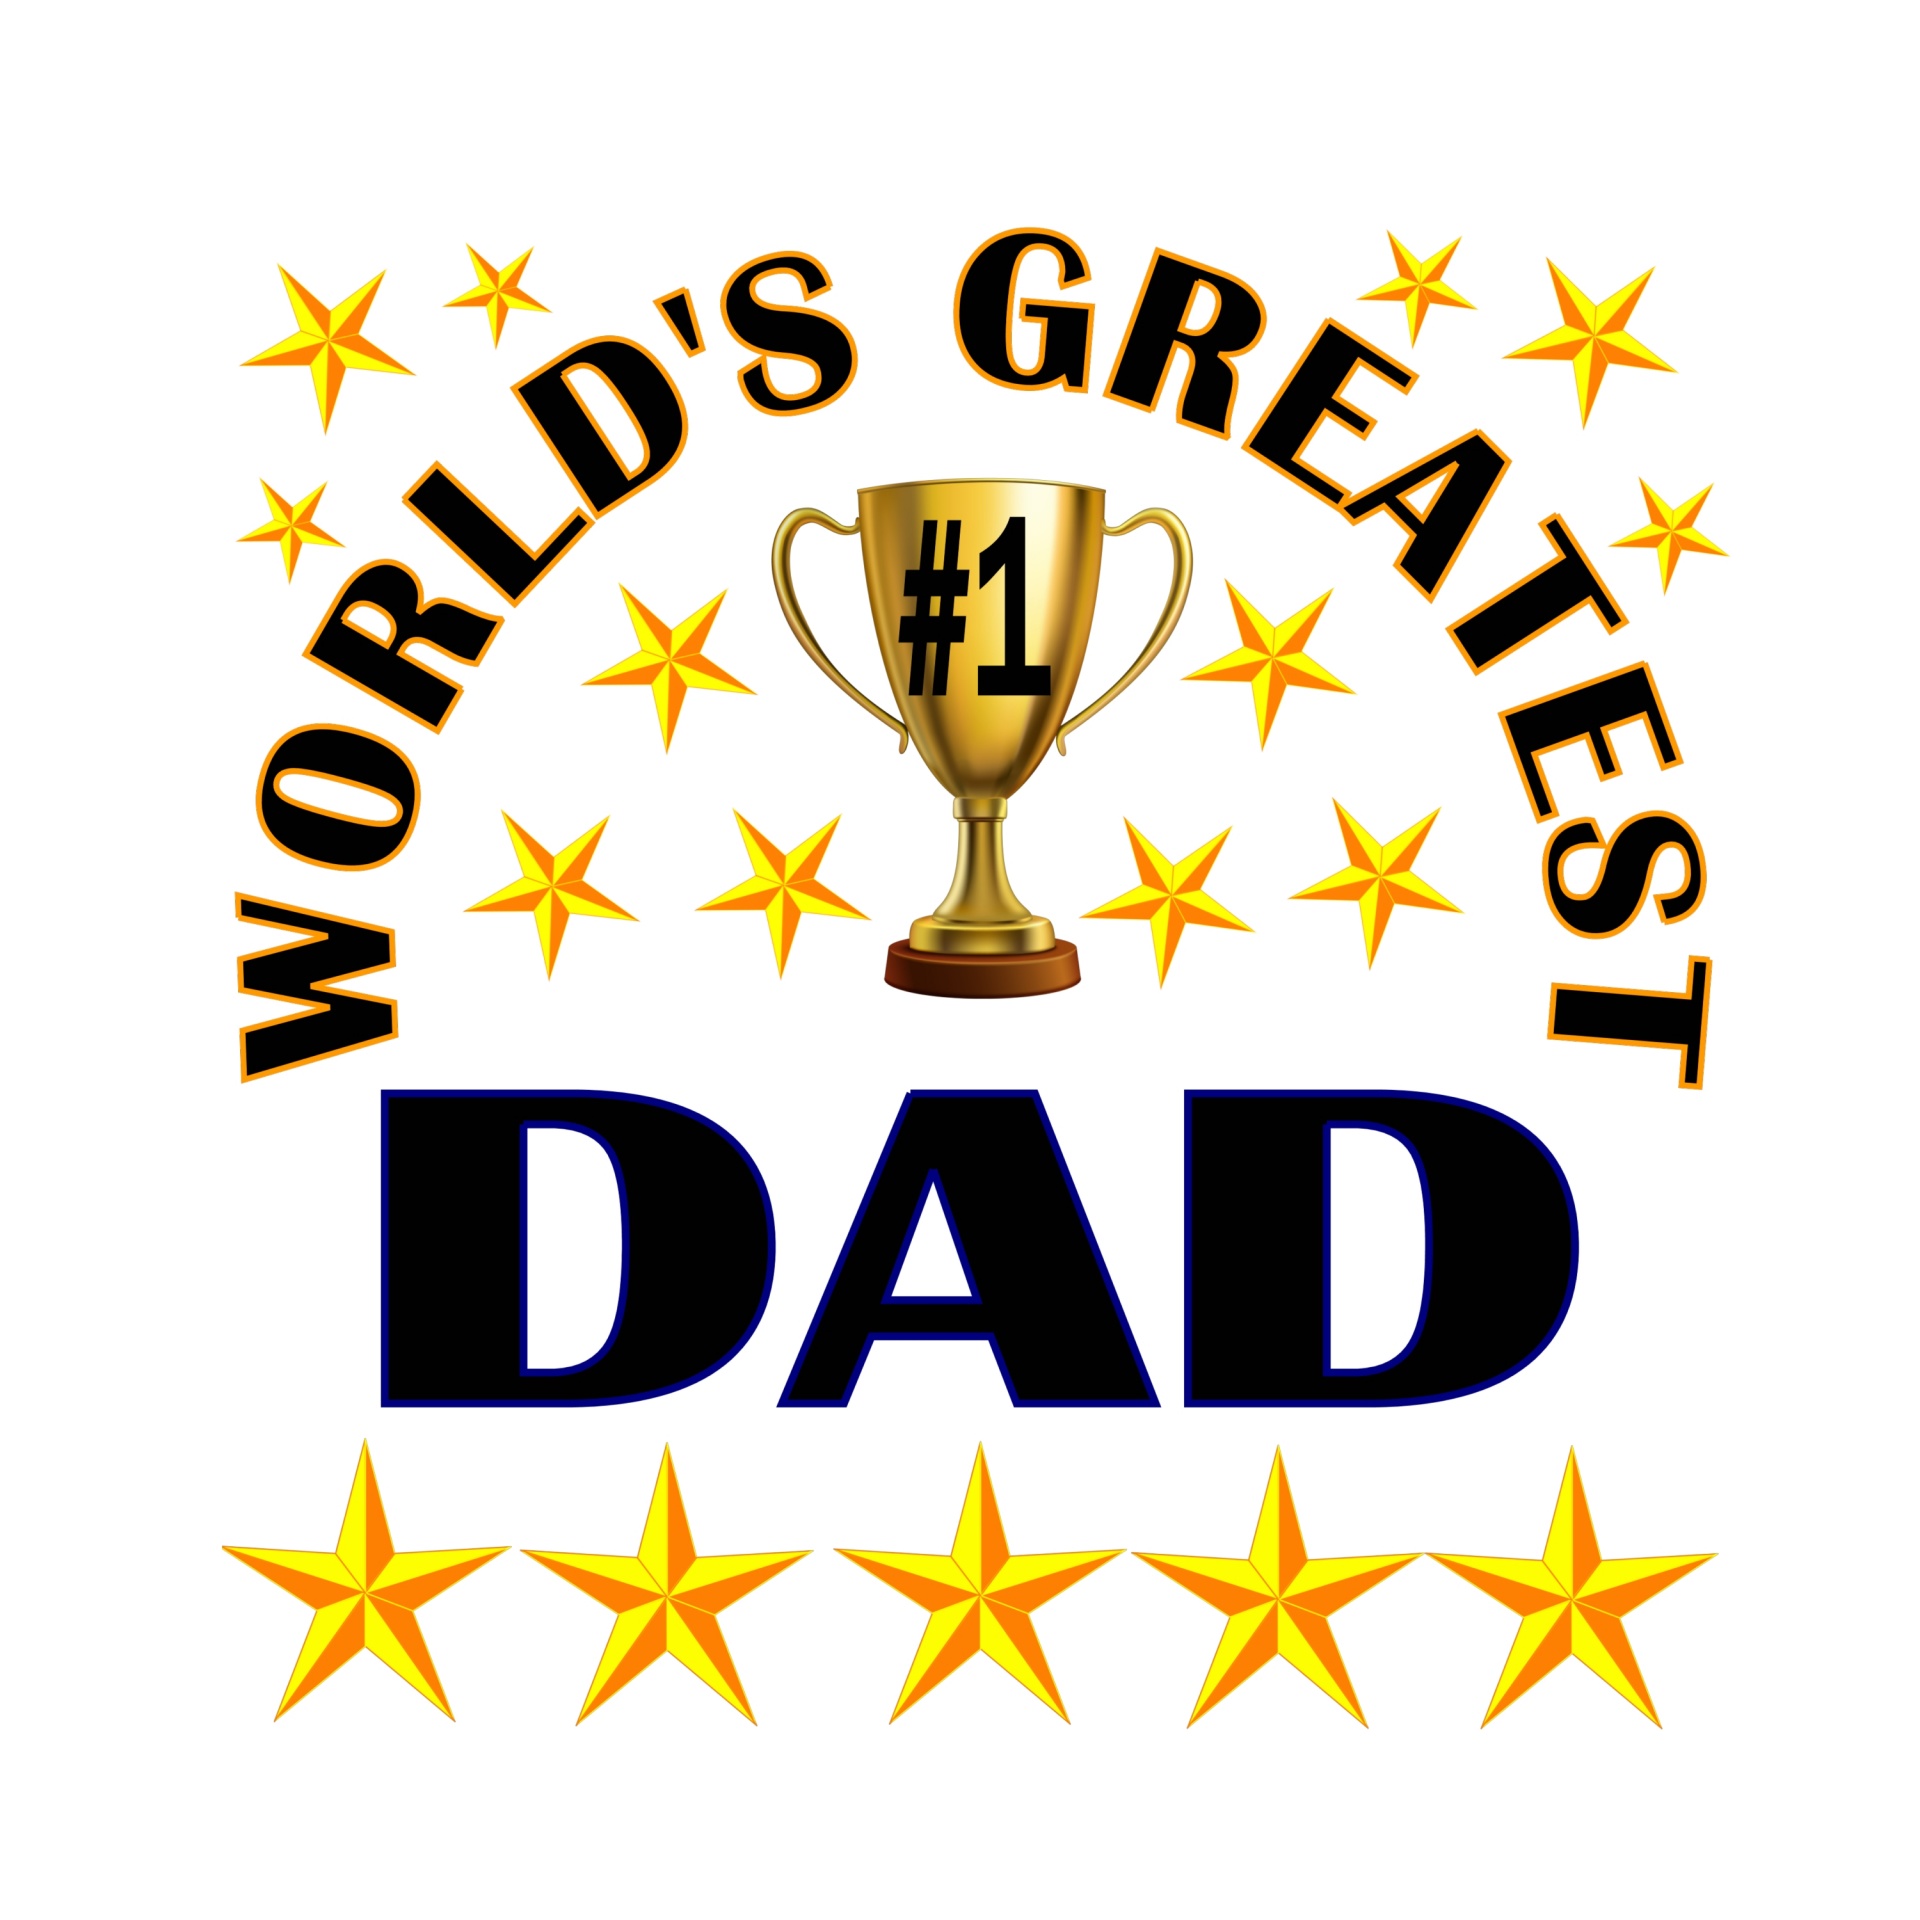 world's greatest dad dad father free photo